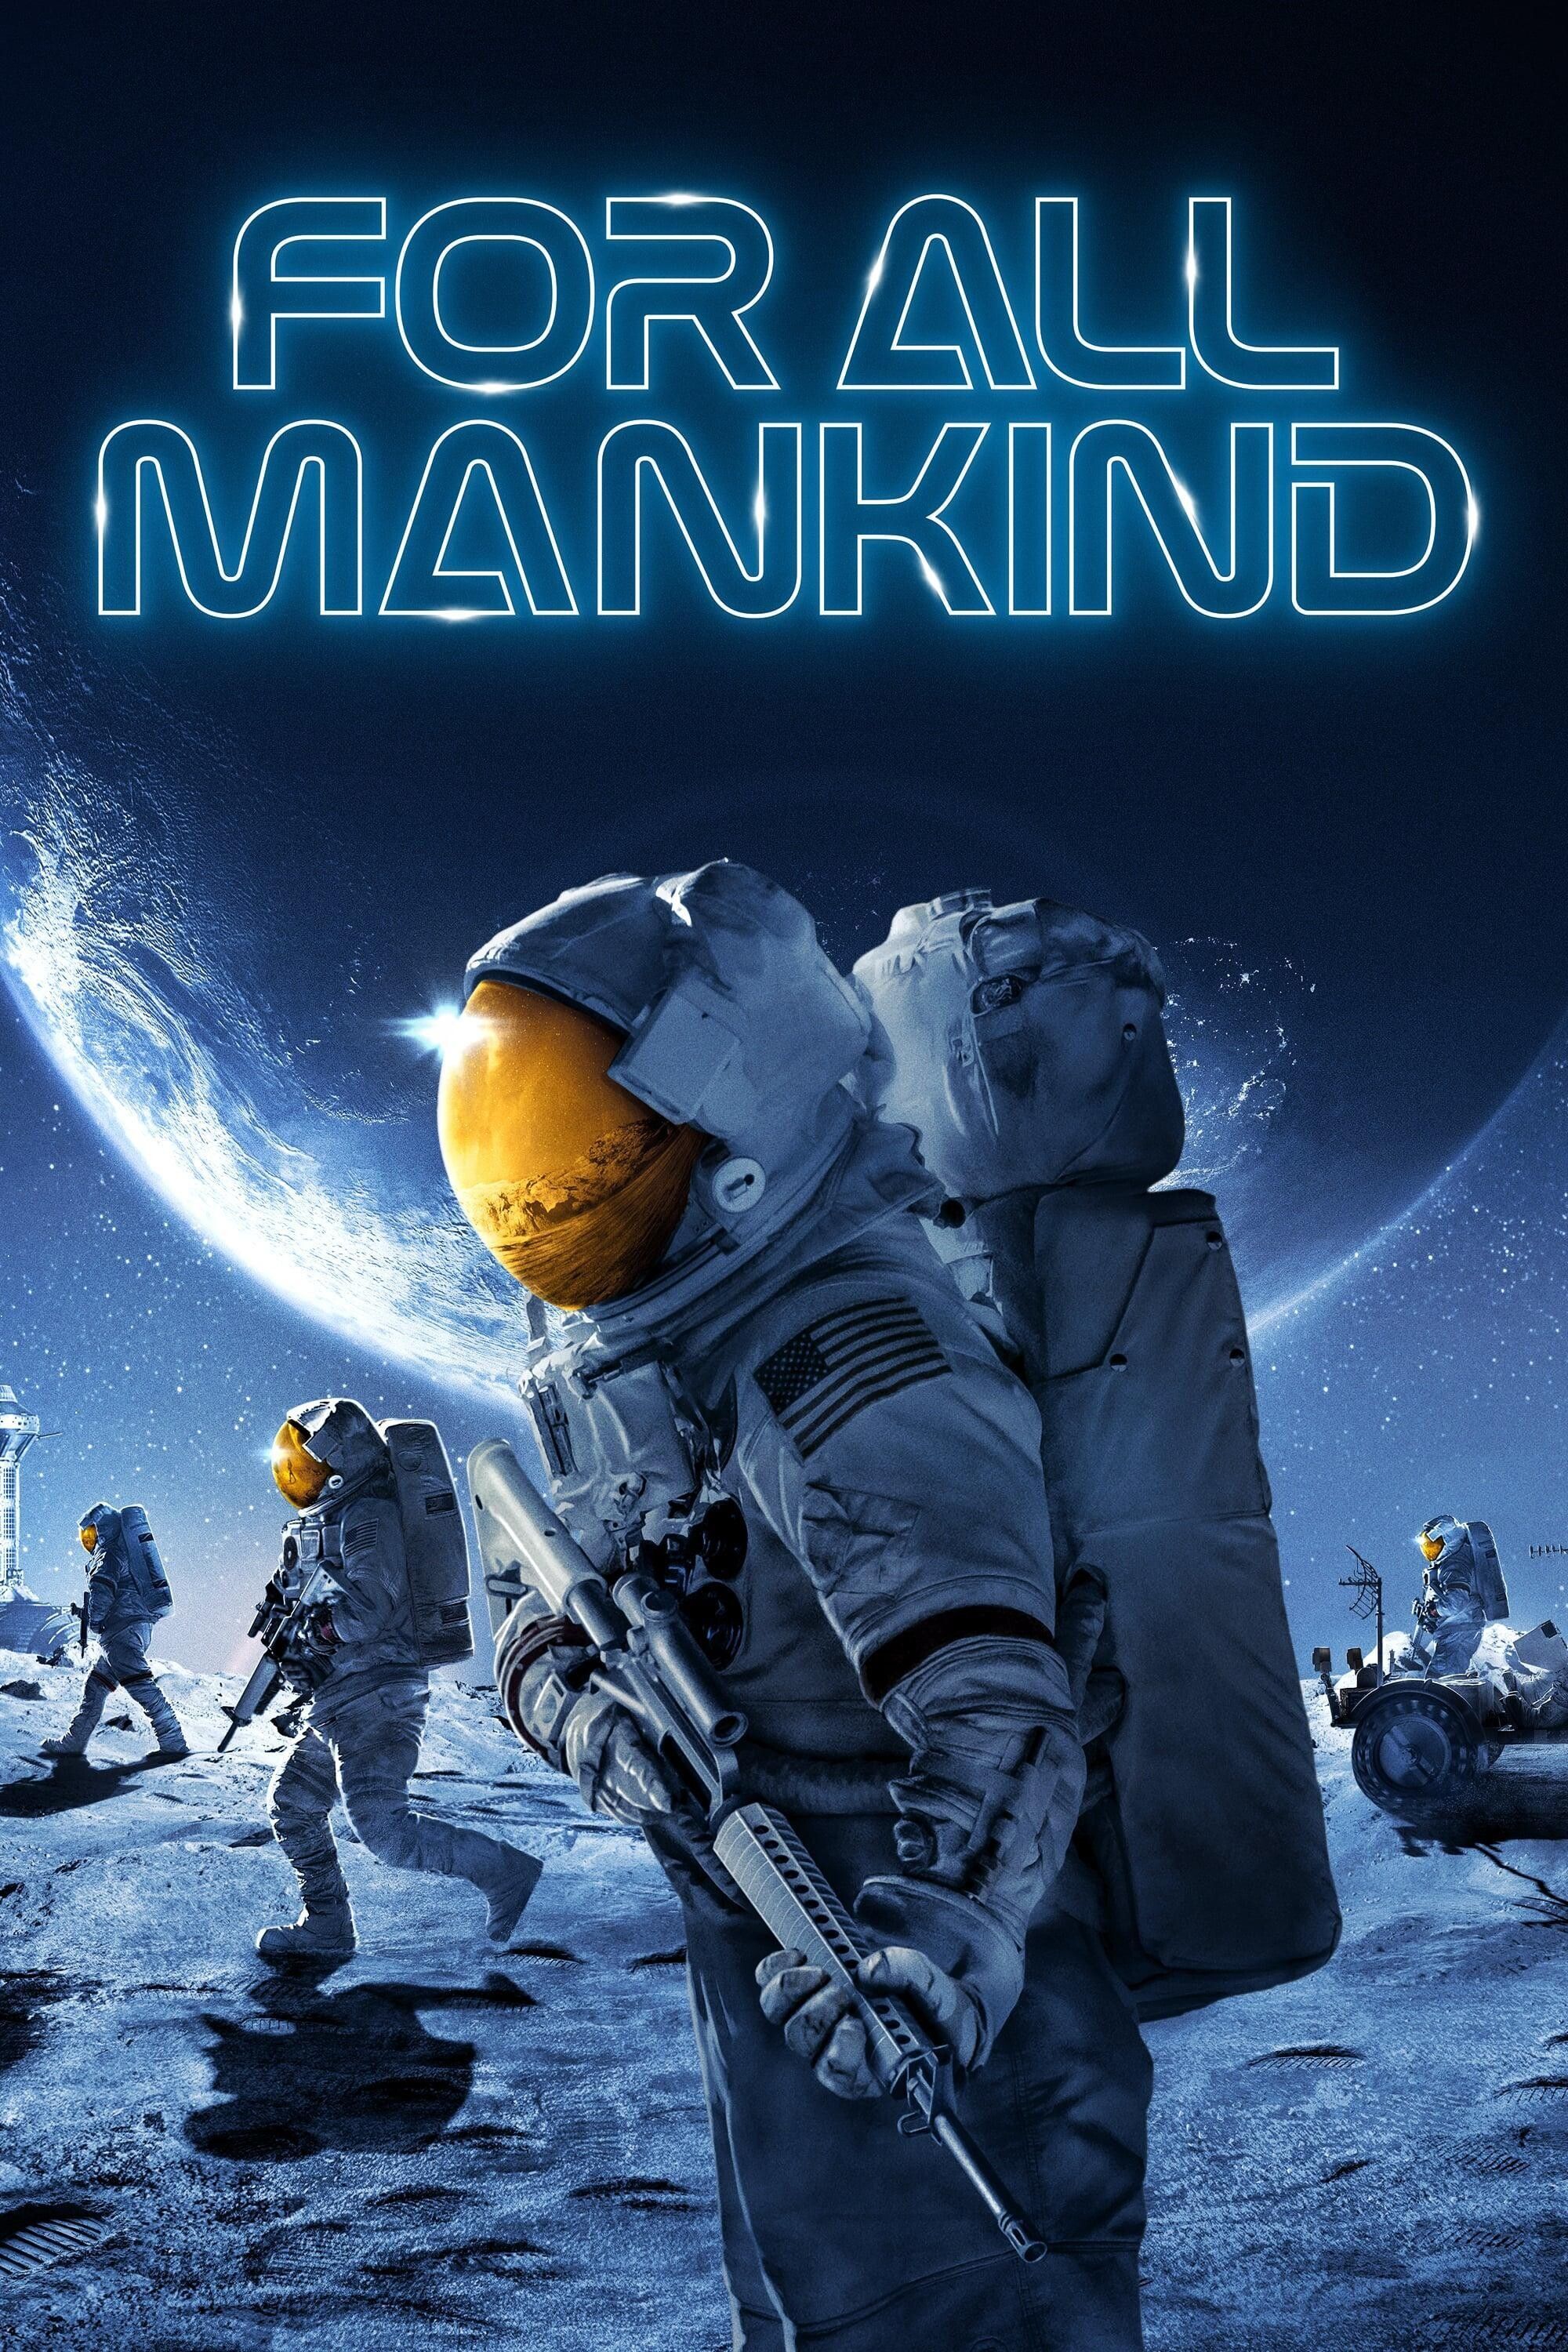 For All Mankind (2019) TV Show Information & Trailers | KinoCheck